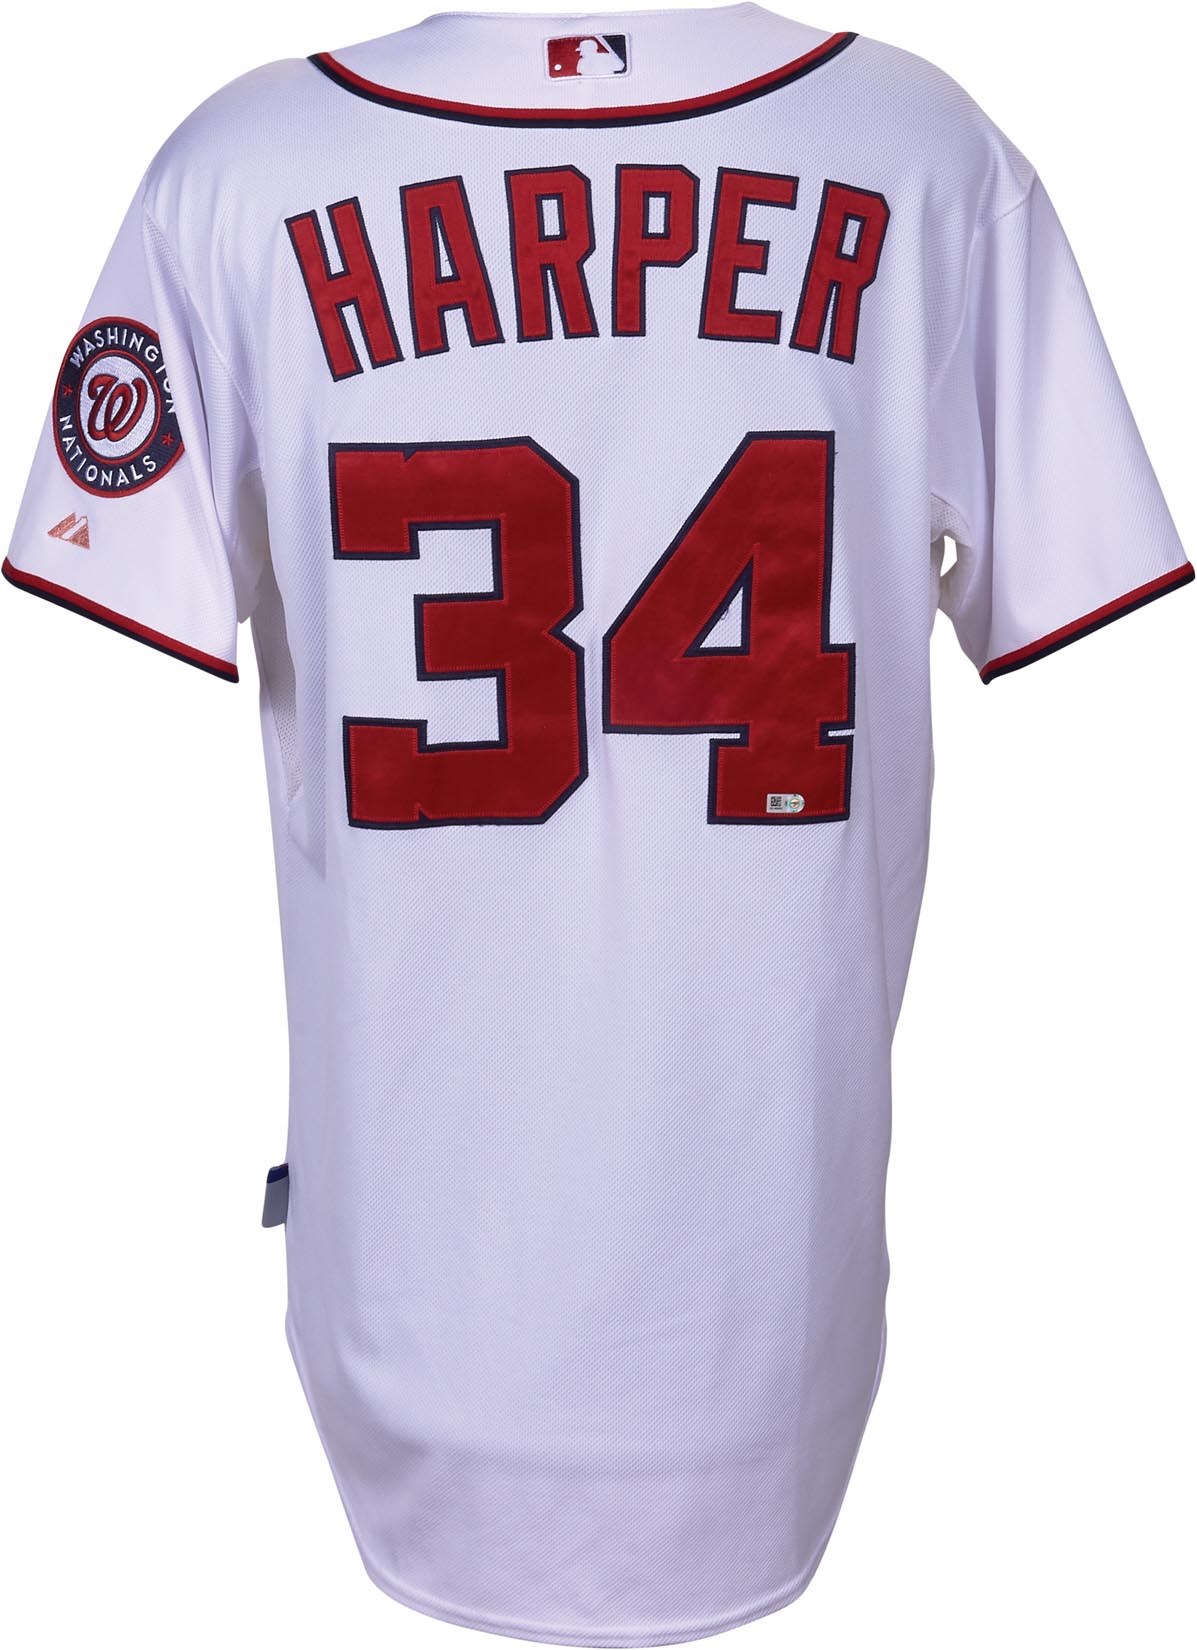 2014 Bryce Harper Game Worn "Walk-Off Home Run" Jersey (MLB Auth. & Photo-Matched to Five Games)